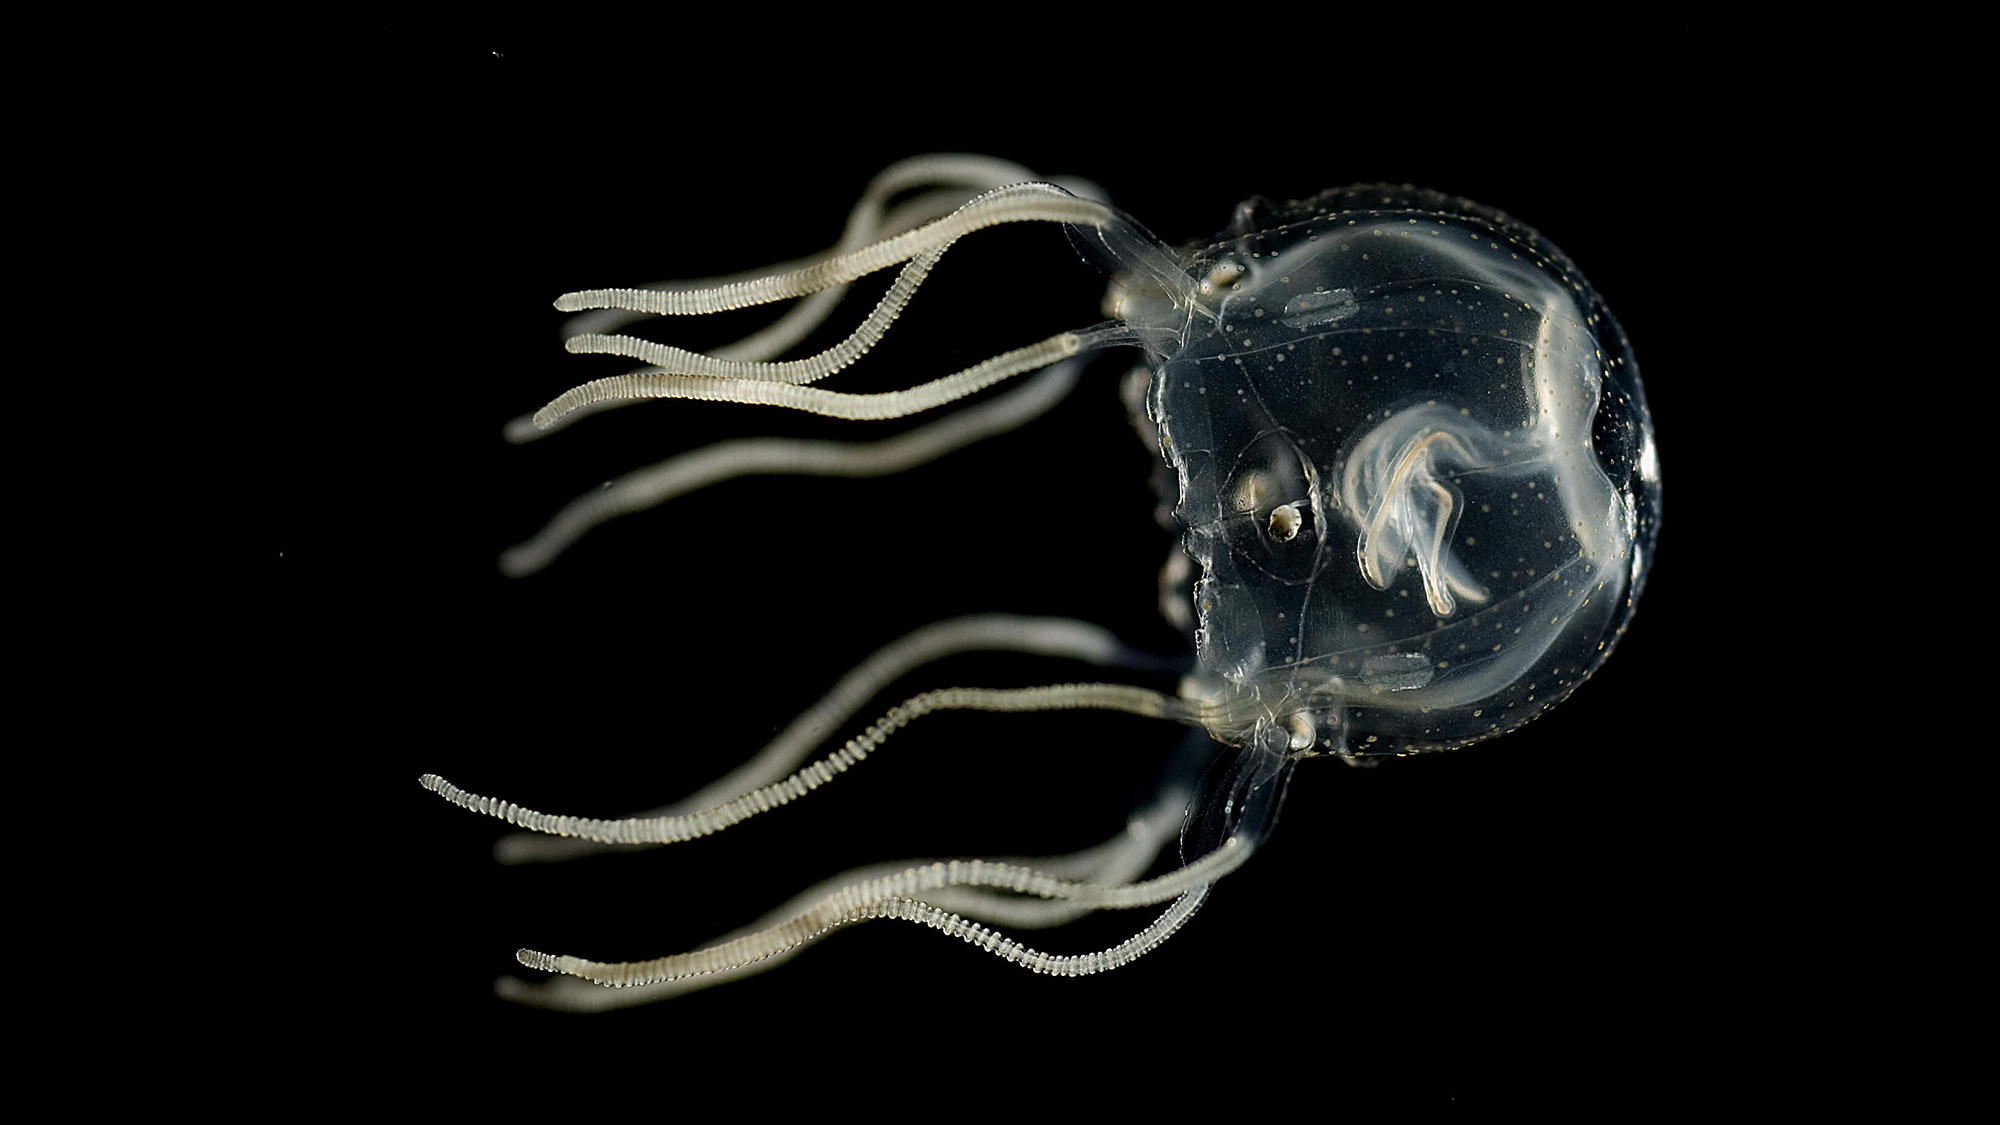 A Caribbean box jellyfish on a black background. It has a round, bell shaped body, with about 11 visible tentacles. It also has four parallel brain-like structures with roughly 1,000 nerve cells in each.